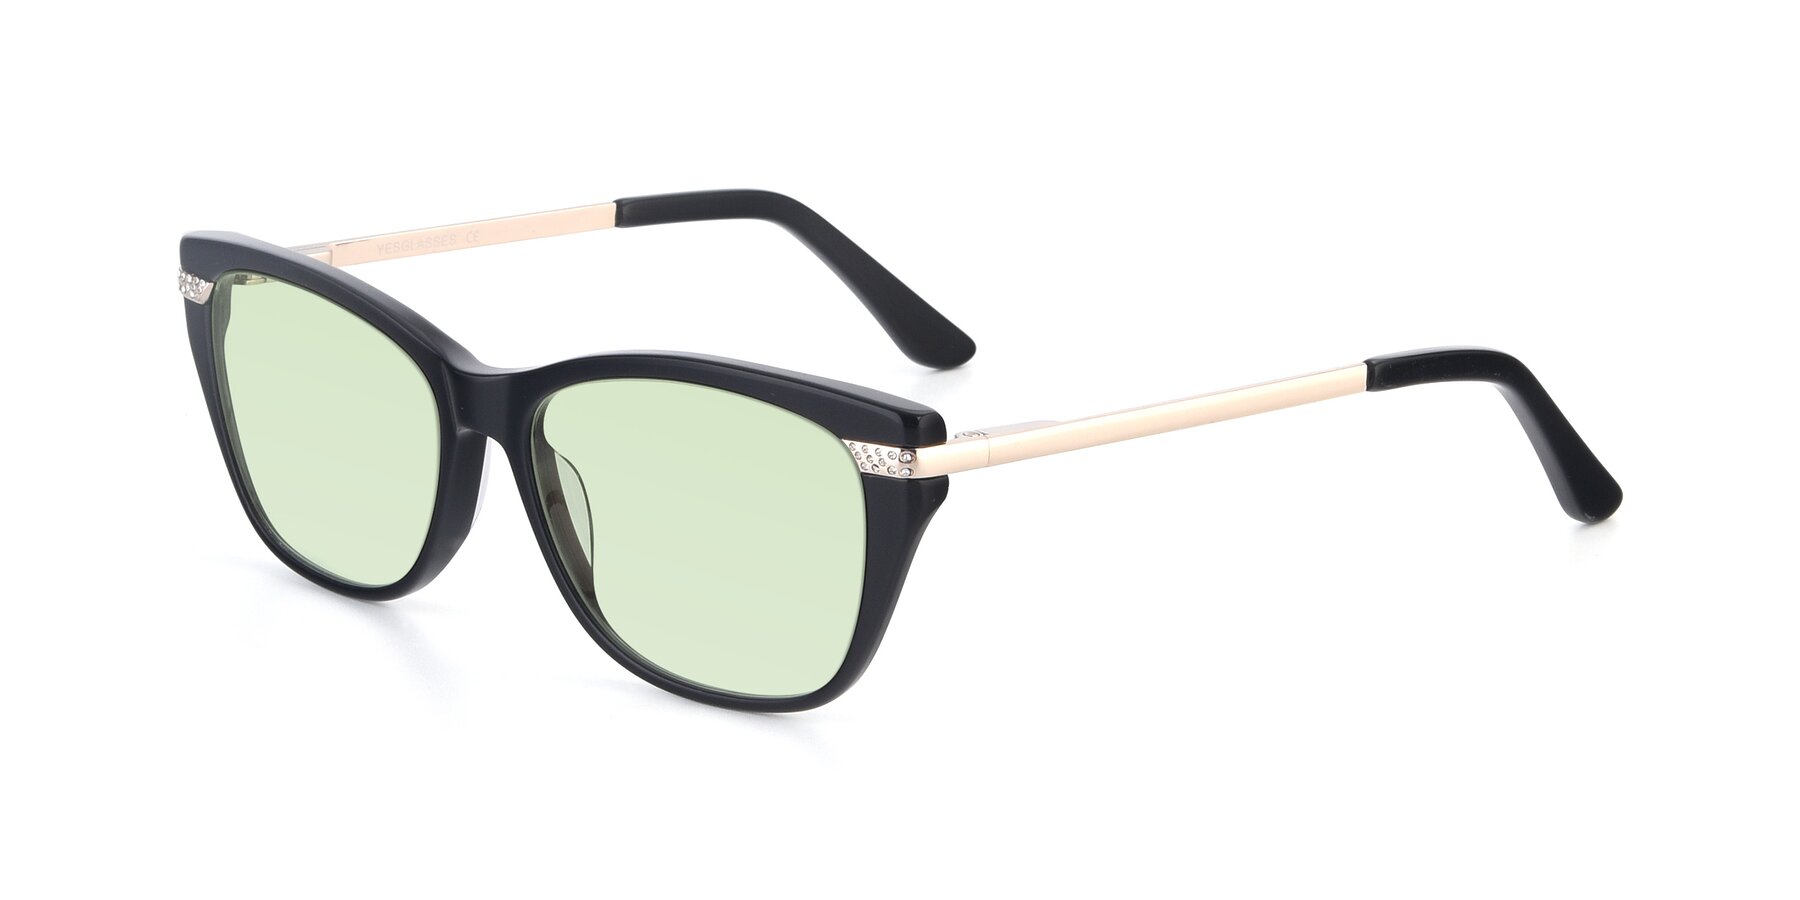 Angle of 17515 in Black with Light Green Tinted Lenses